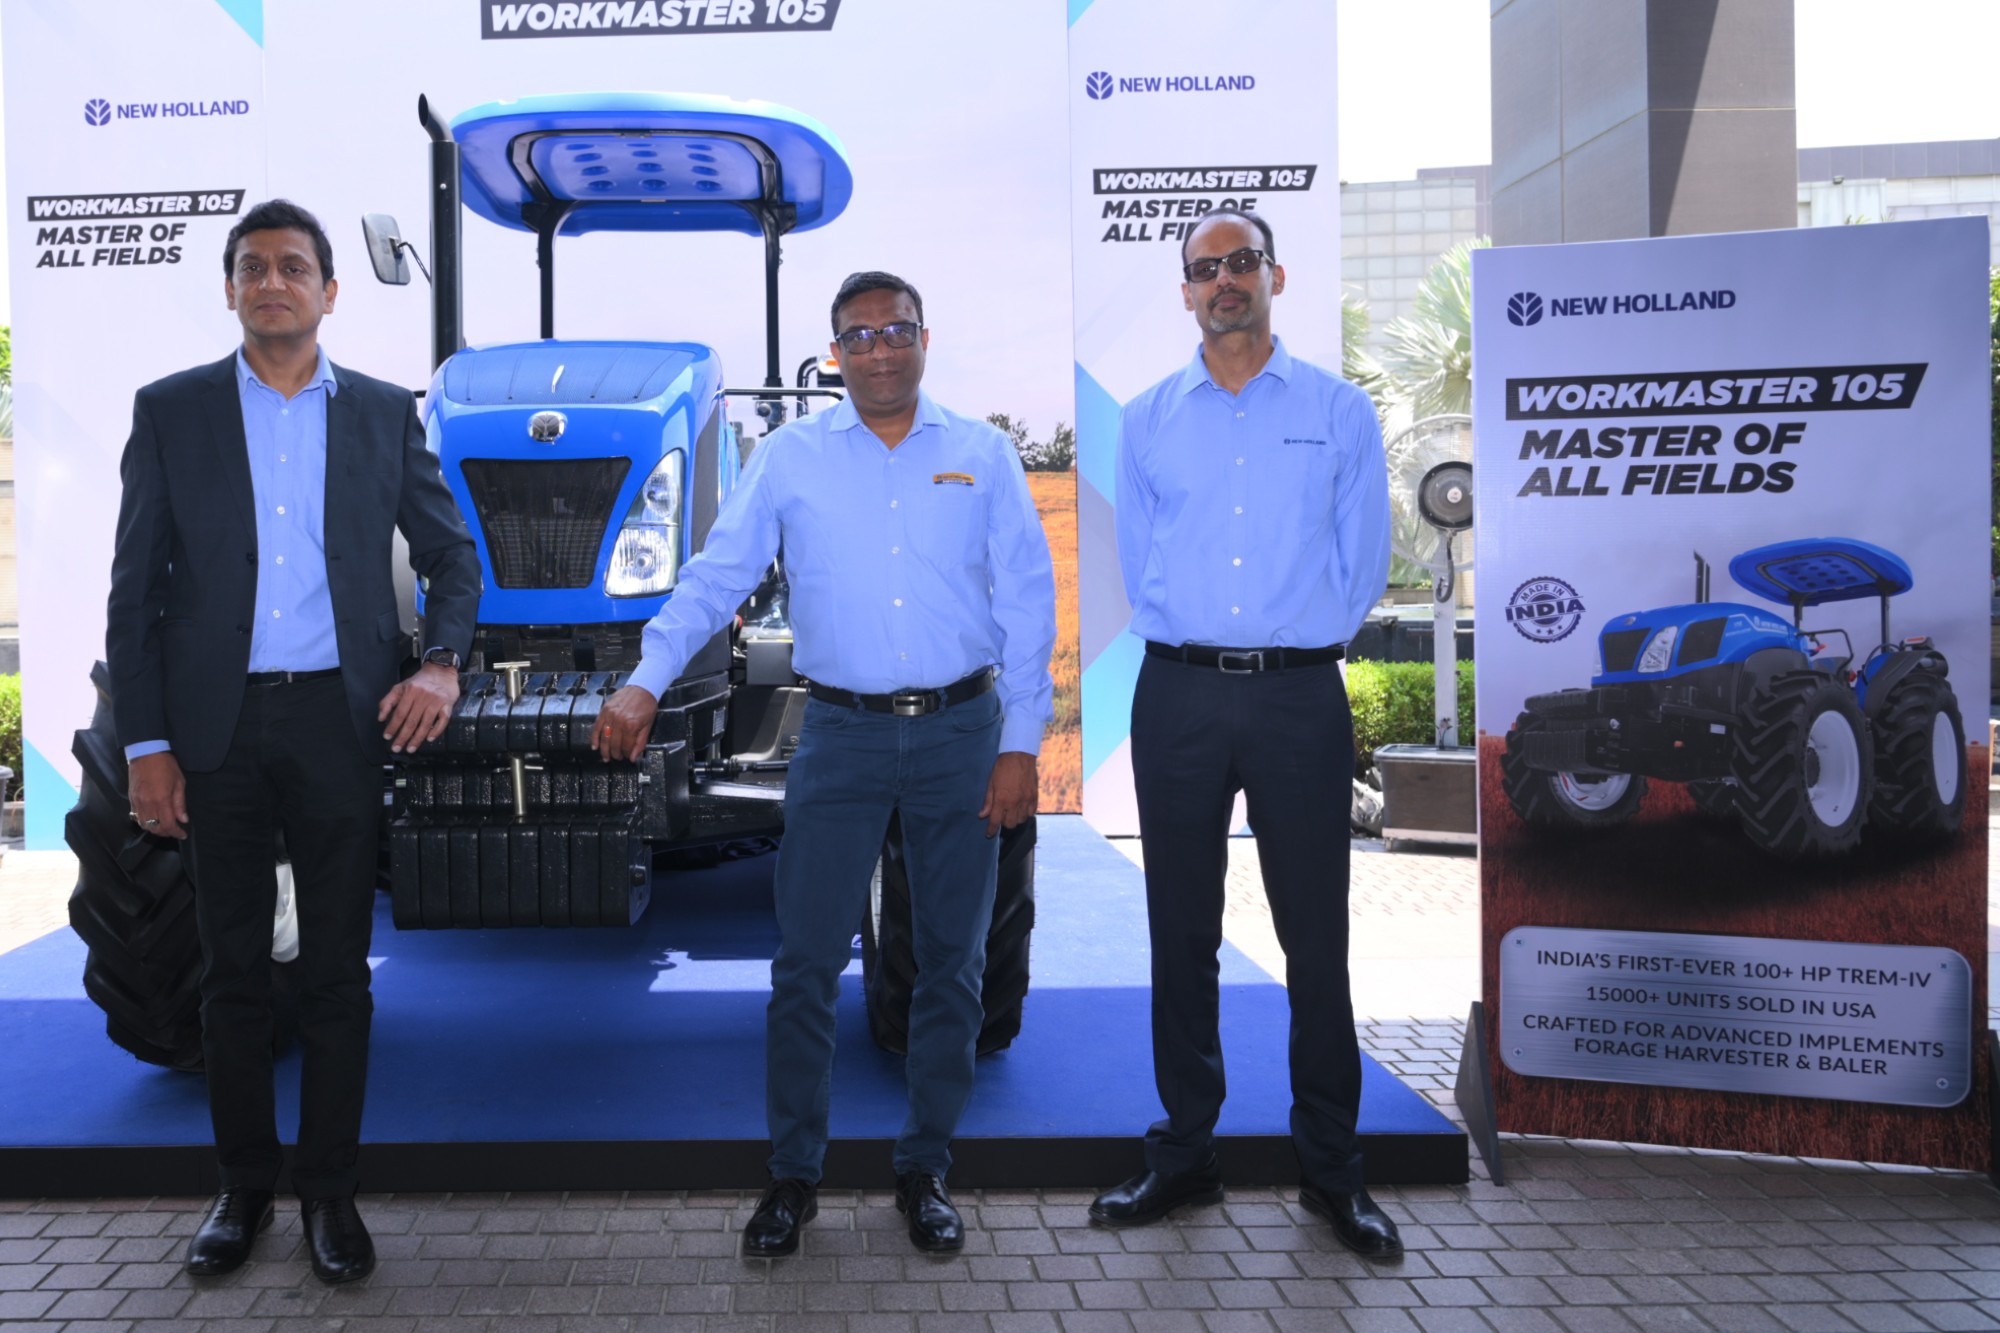 Mr. Narinder Mittal, Country Manager & Managing Director - CNH, Mr. Sandeep Gupta, Director of Sales, Agriculture and Mr. Tarun Khanna, Marketing Director, Agriculture, from CNH (India & SAARC) with the newly launched Made-in-India Workmaster 105 tractor _ B2B